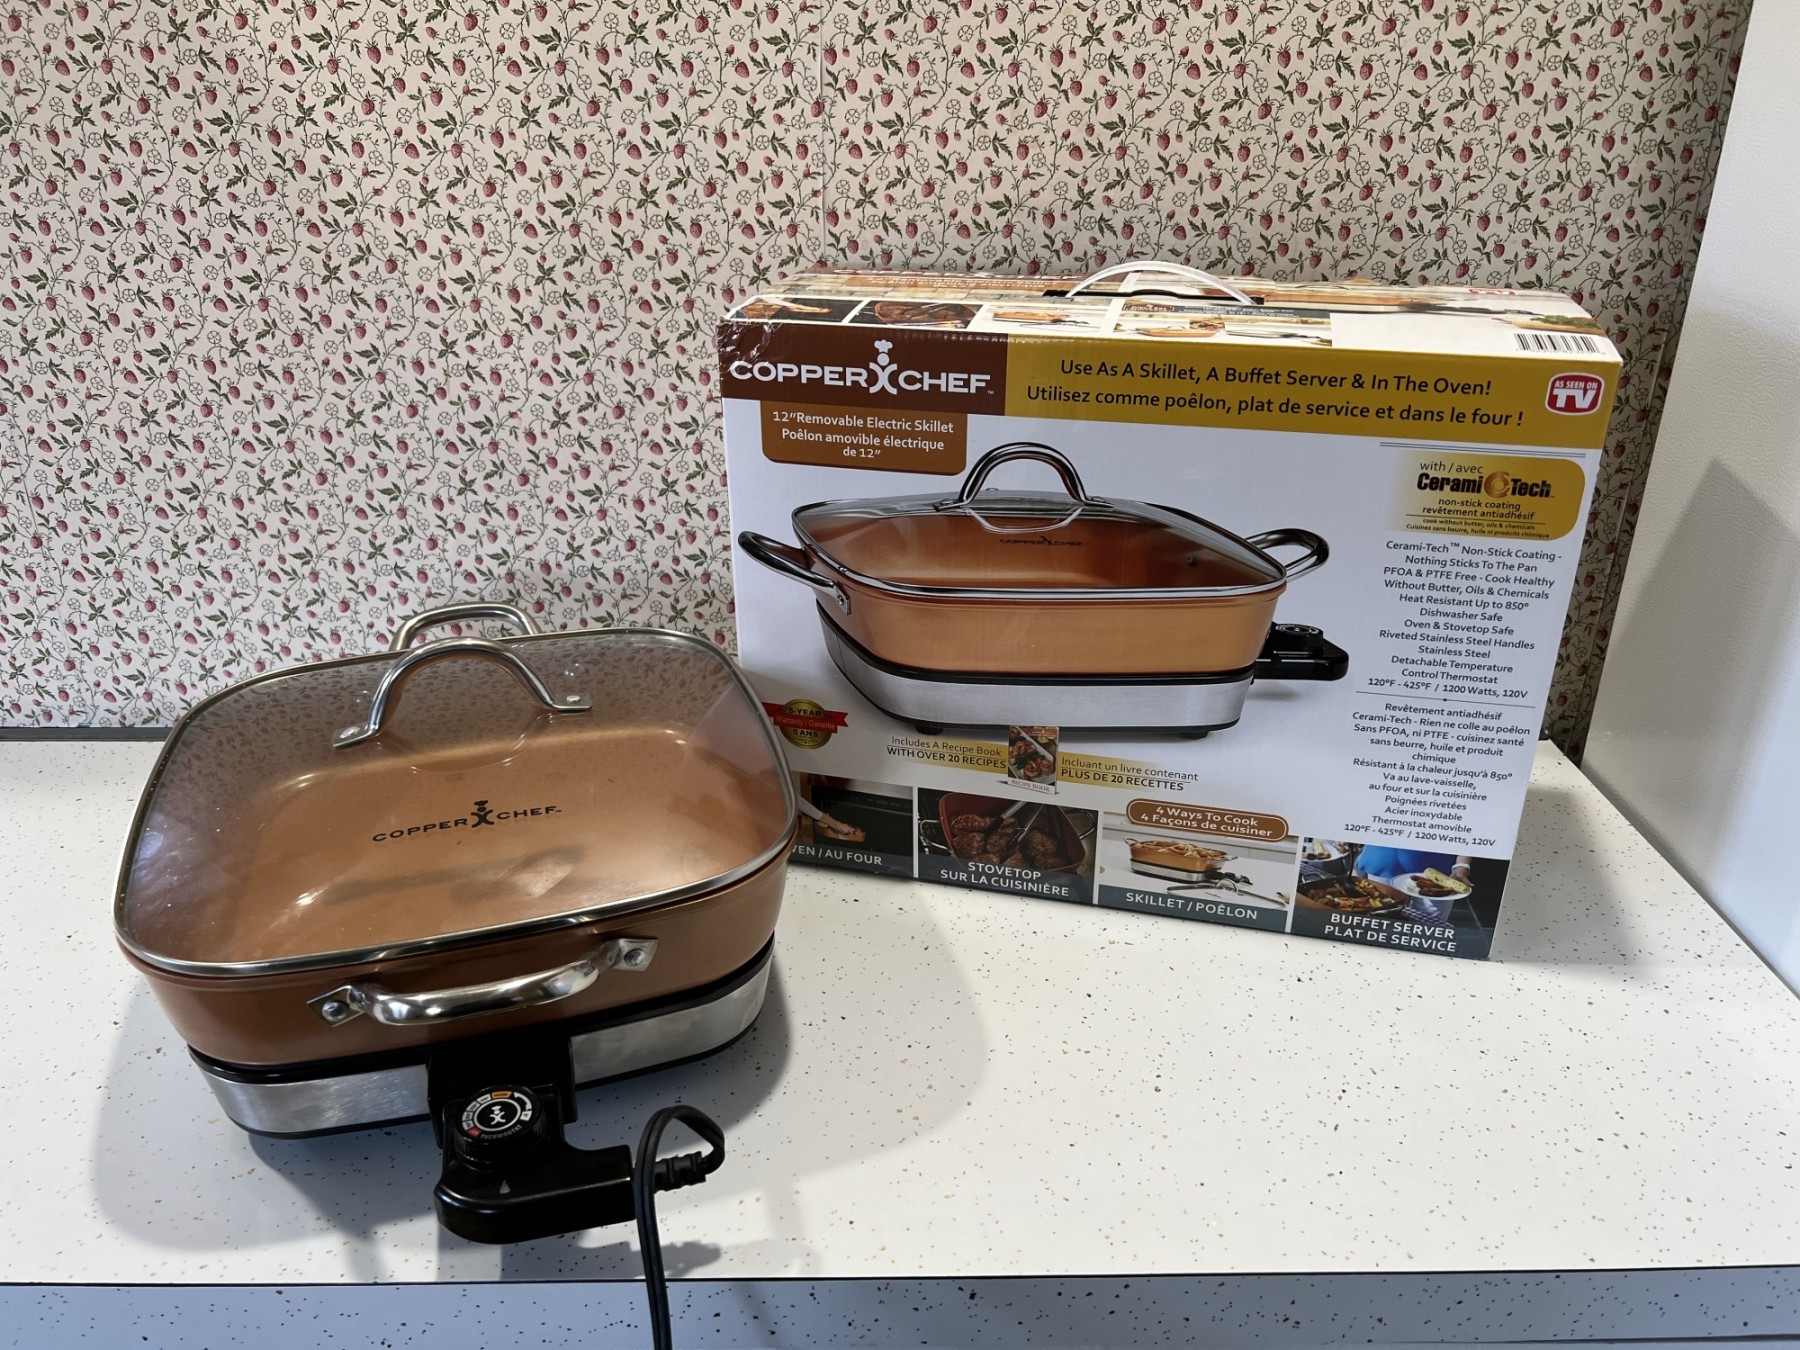 Copper Chef 12 Removable Electric Skillet #1074536